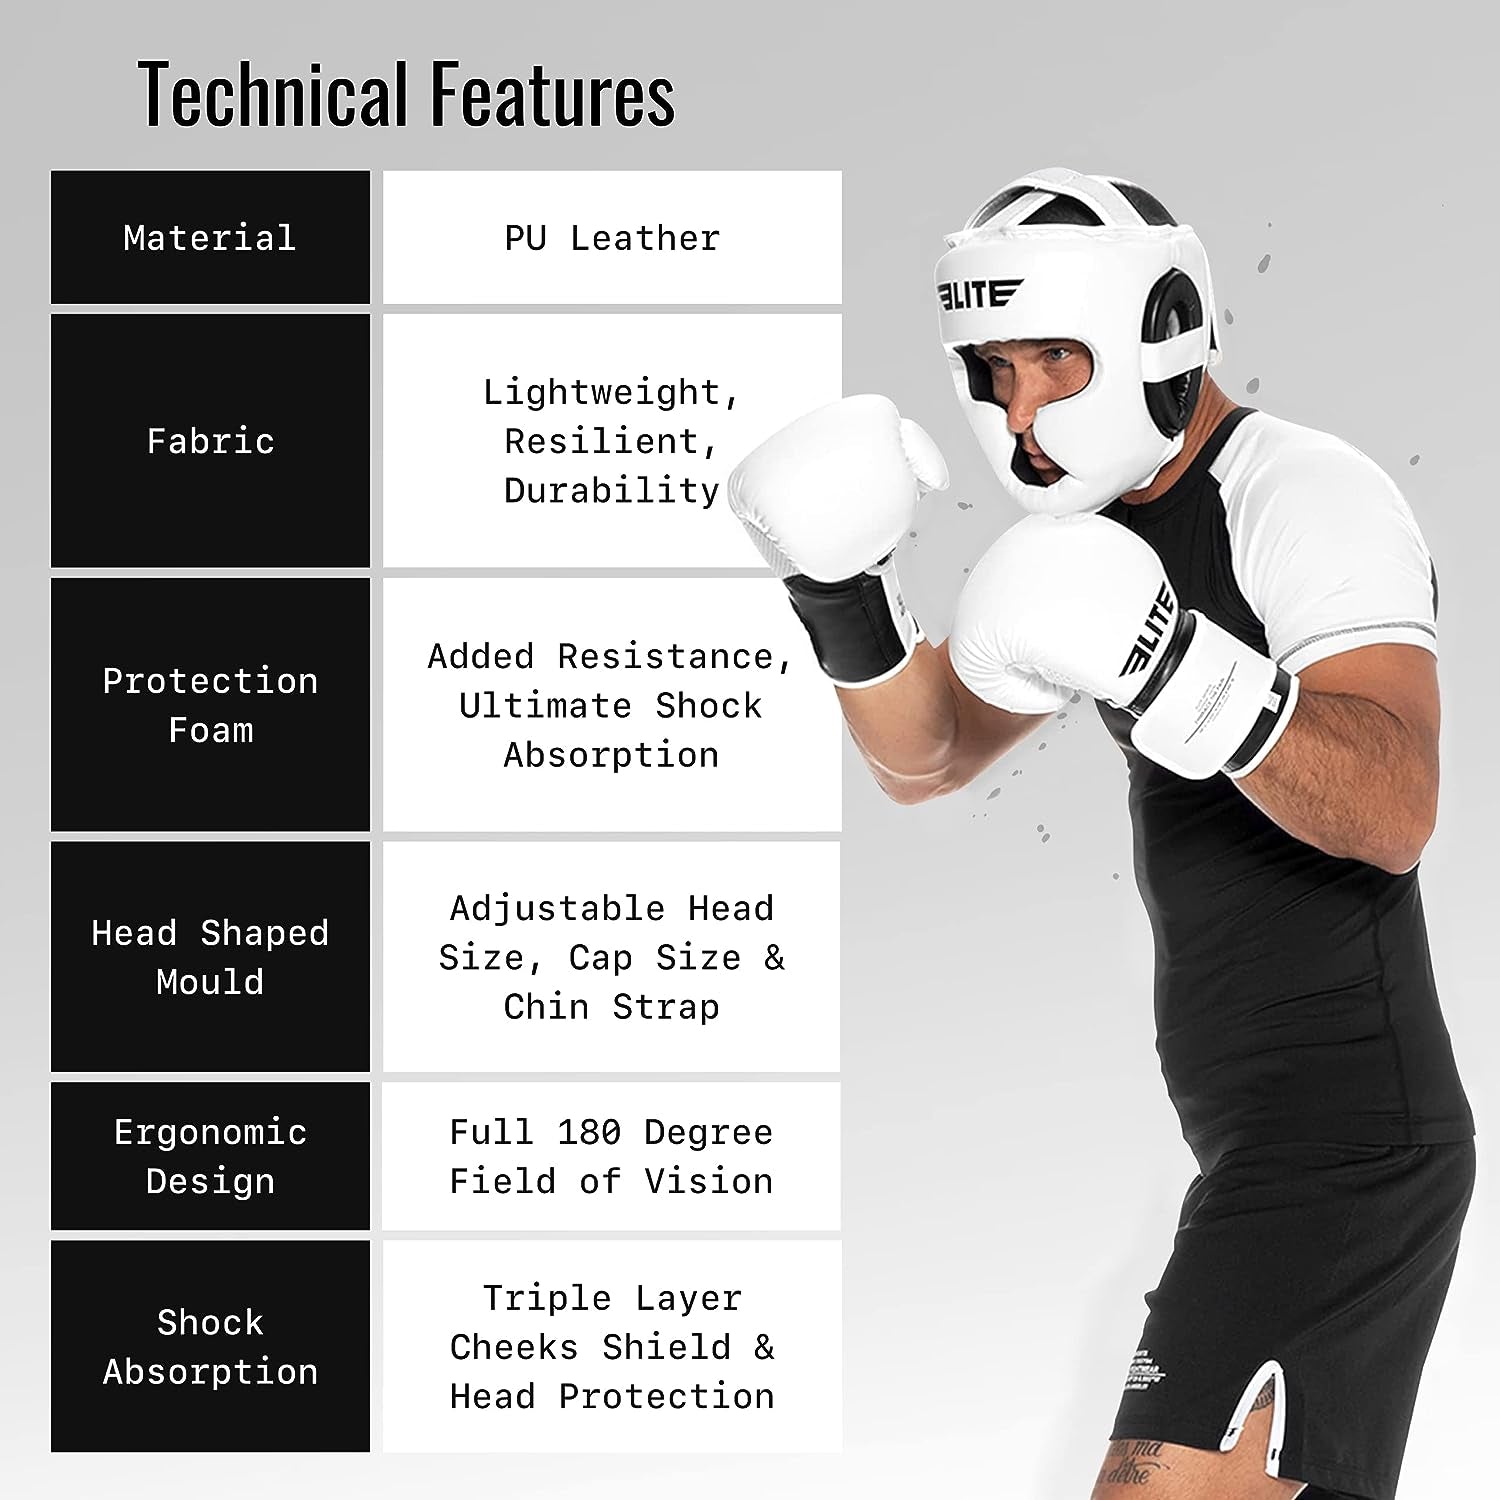 Elite Sports Best Celestial Head Guard, a Complete Package for MMA and Kickboxing Trainees, Muay Thai Boxing Safety Head Guard for Adult Men